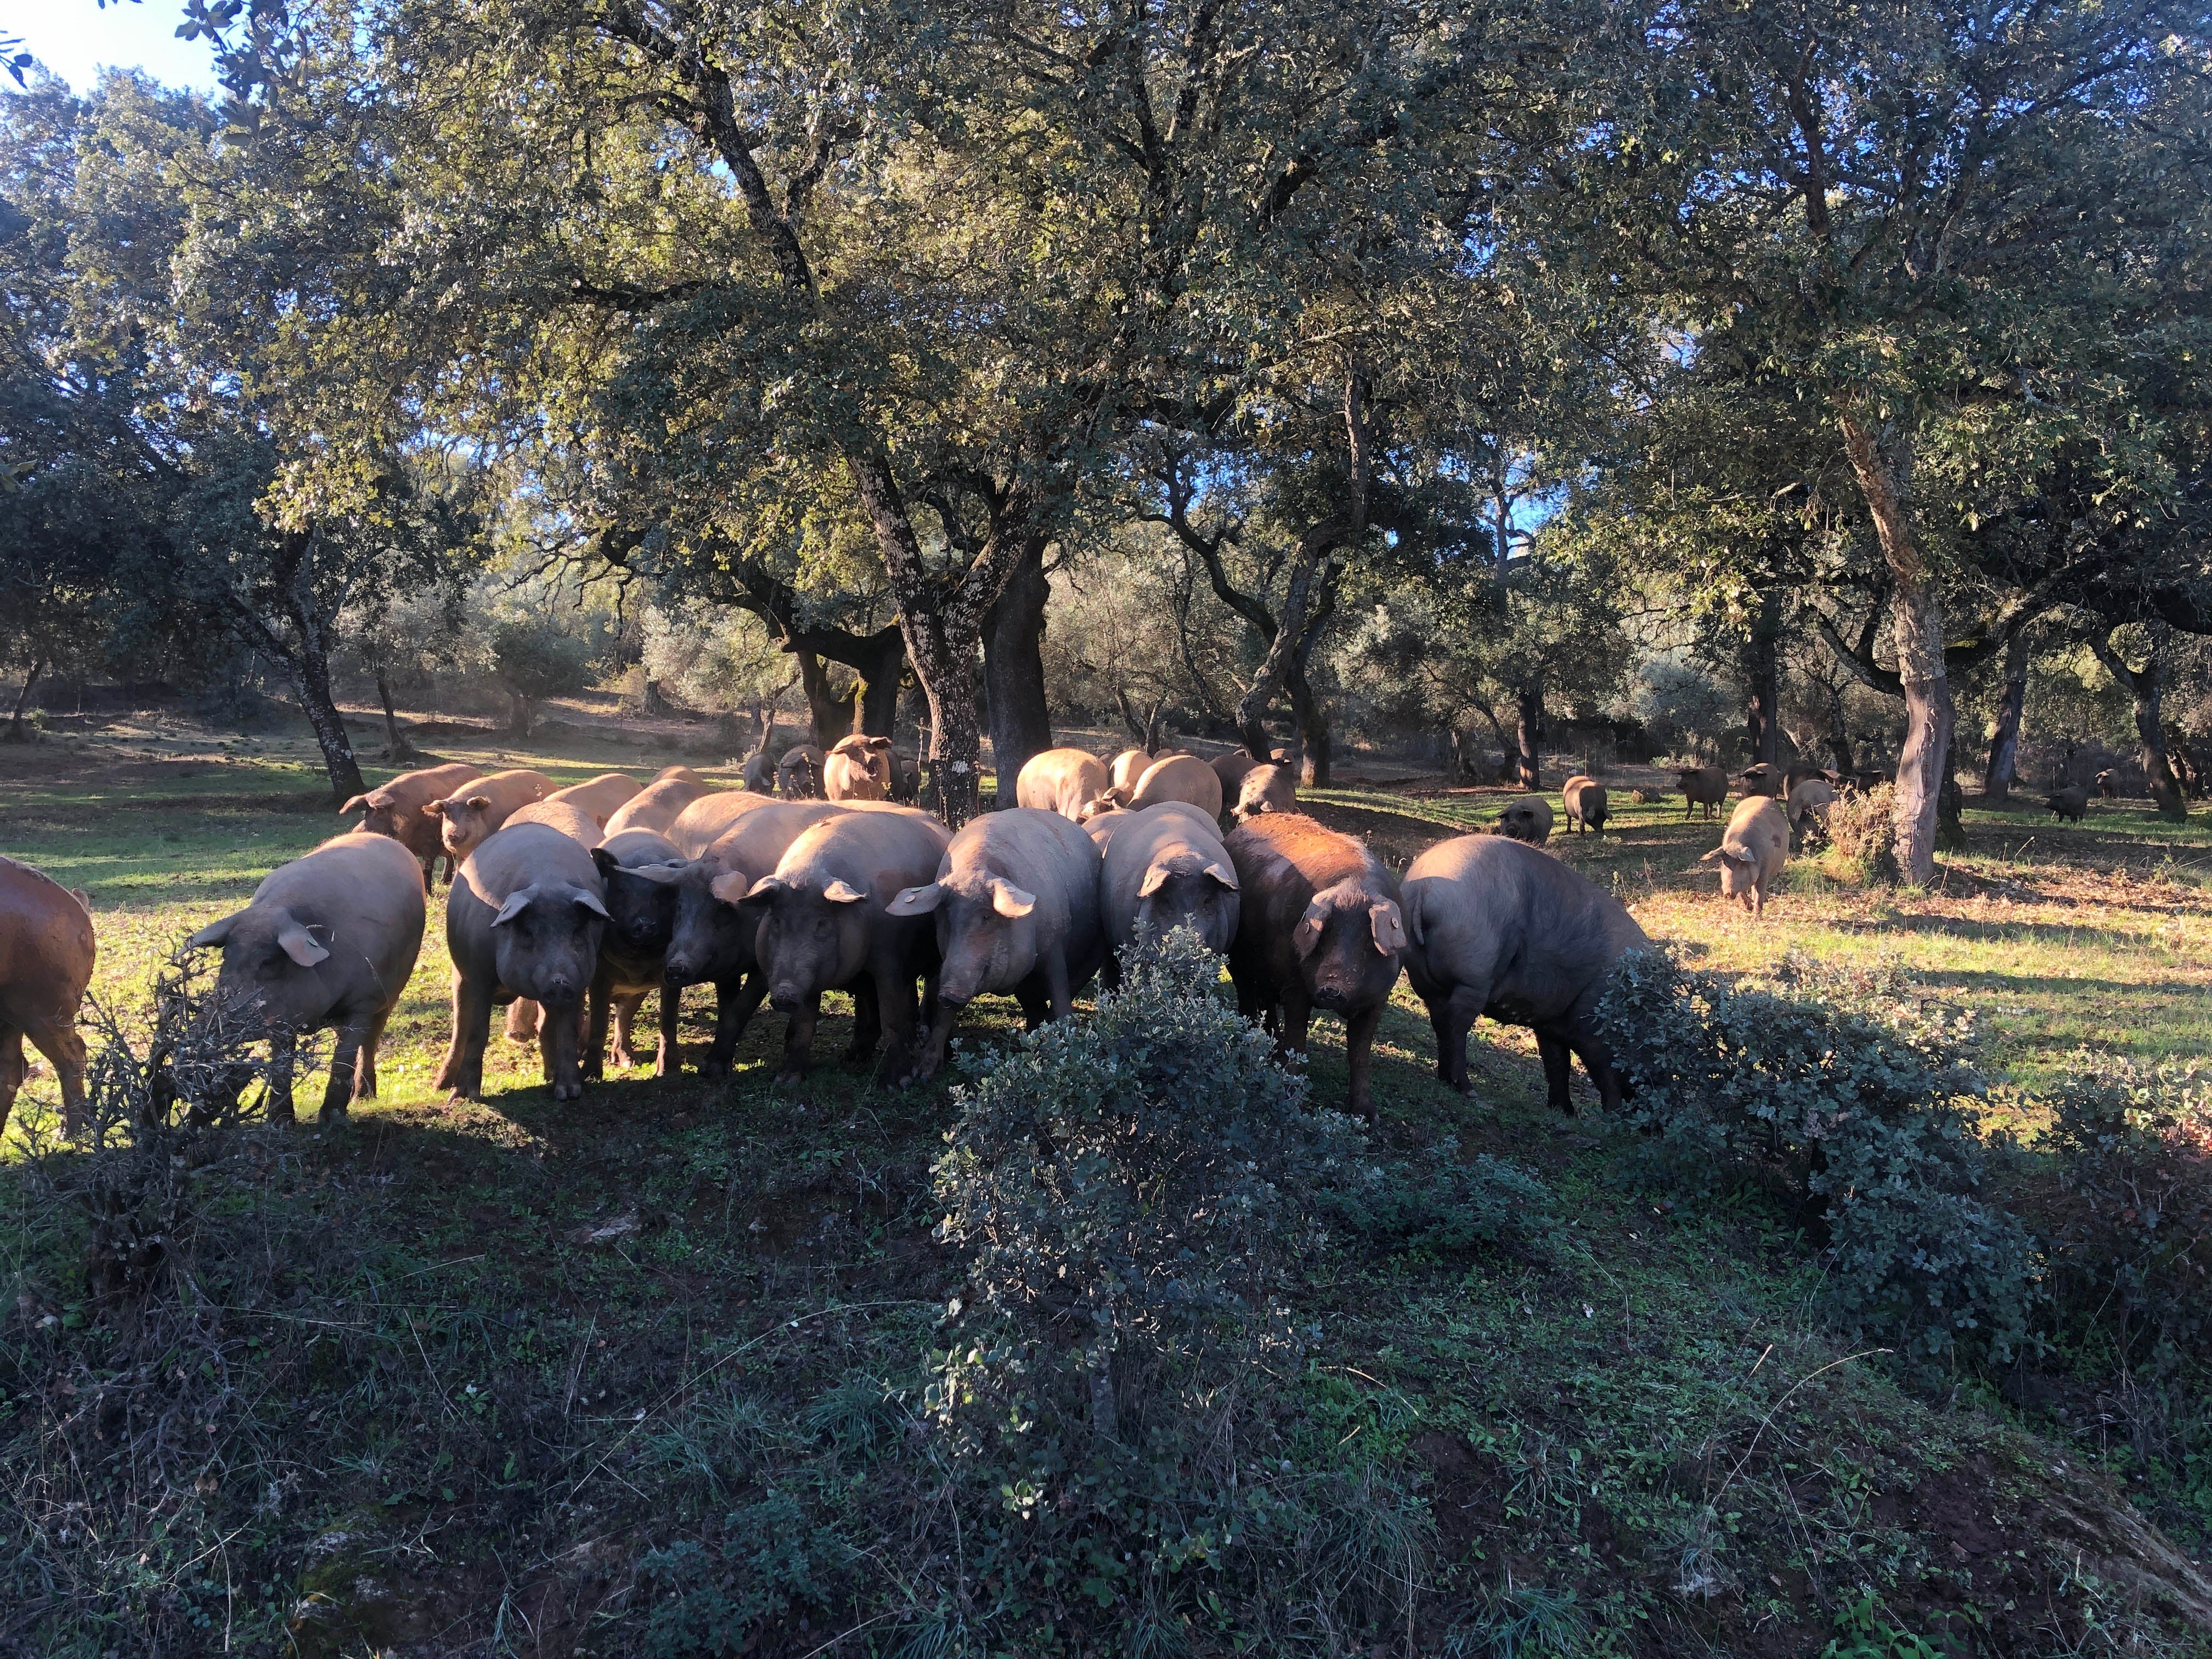 Named after their black hoofs, the pigs like to roam in herds